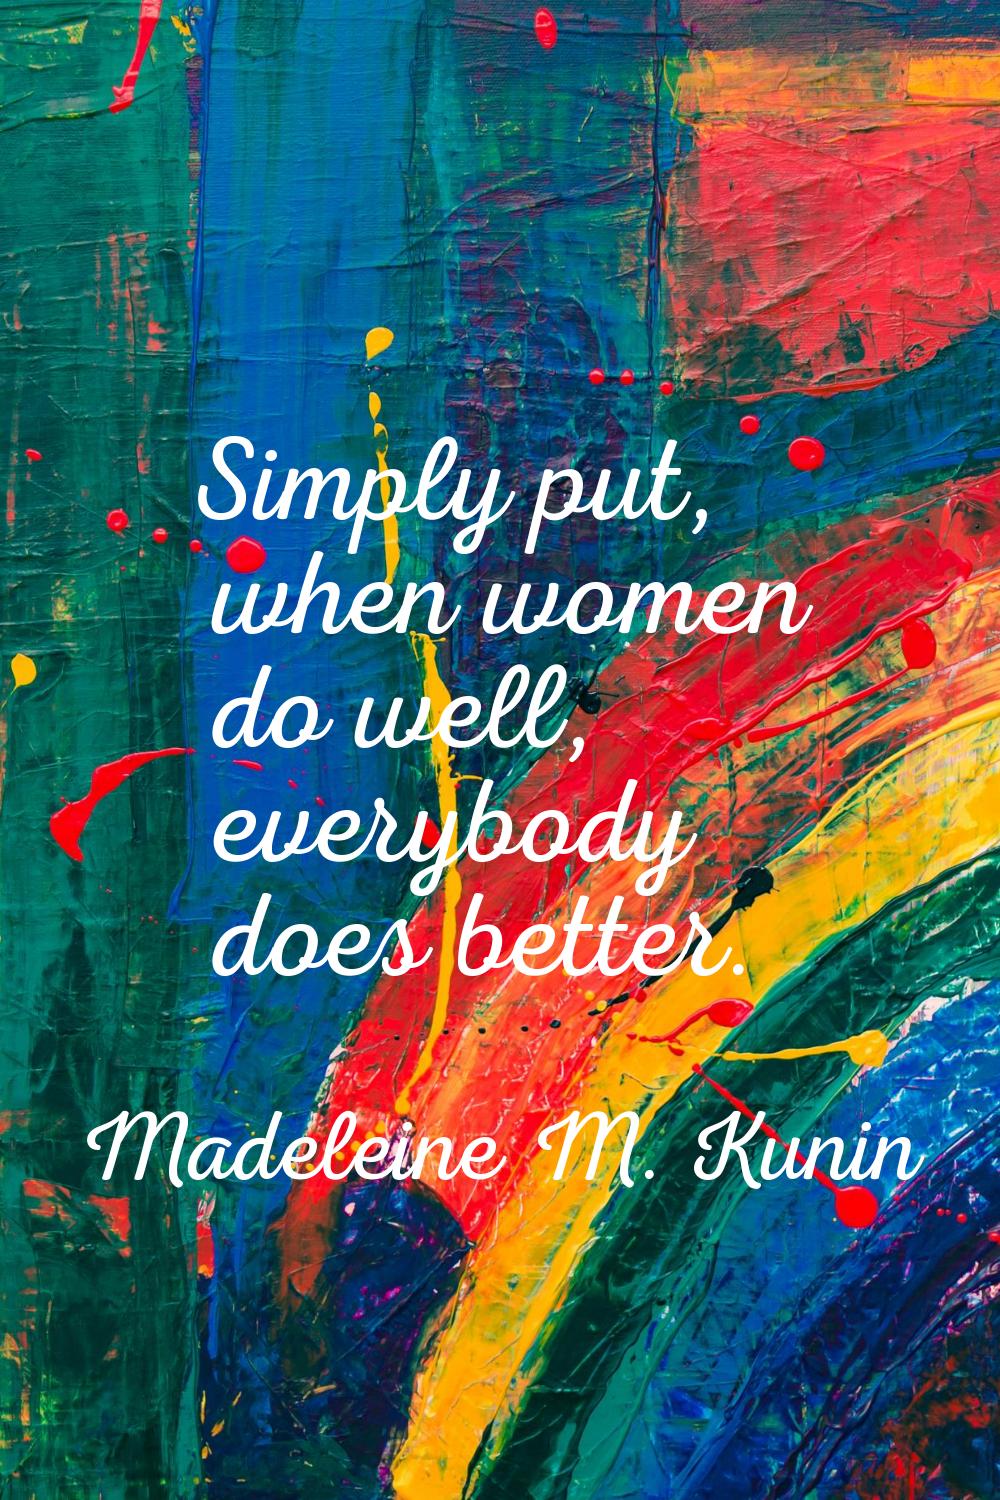 Simply put, when women do well, everybody does better.